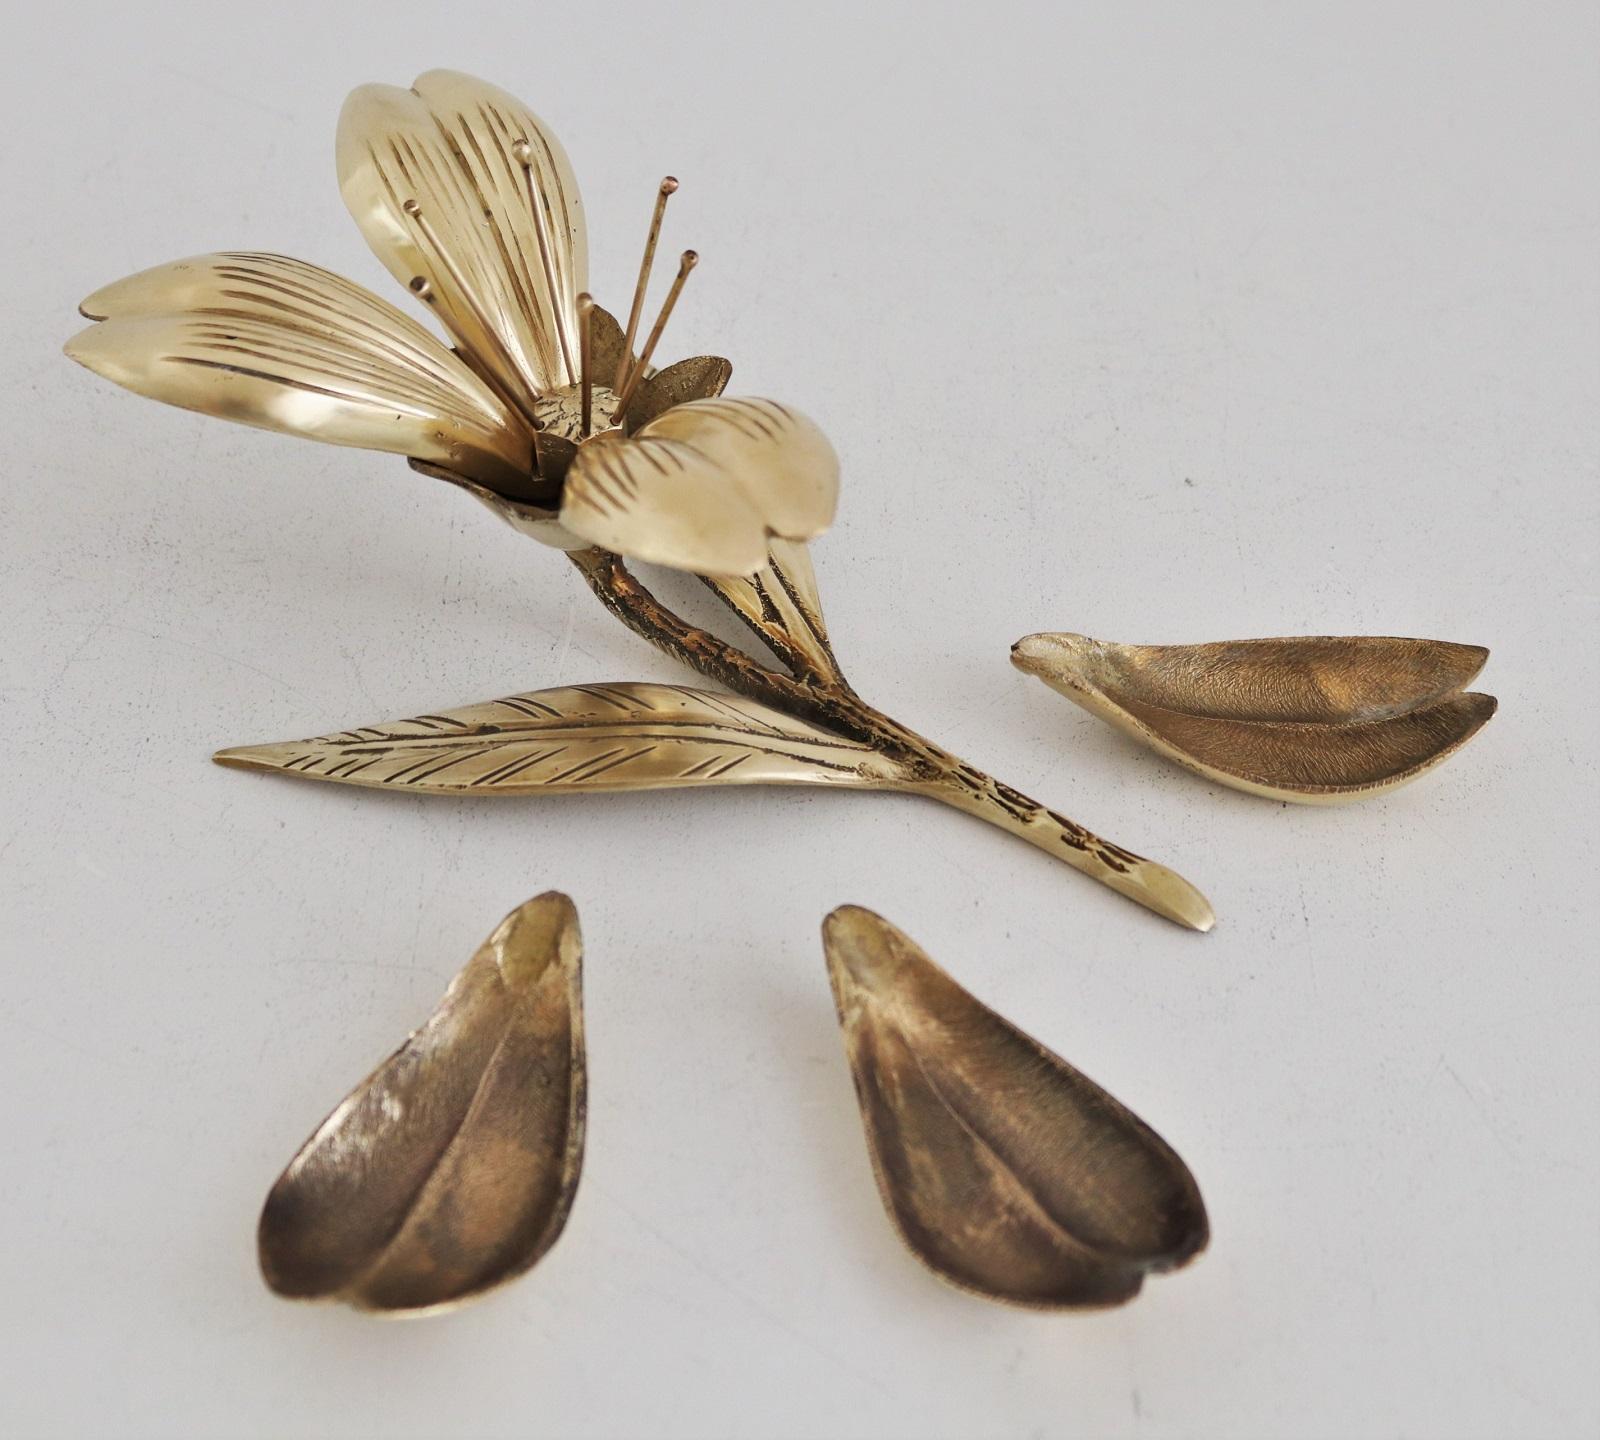 Italian Midcentury Flower in Brass with Petal Ashtrays for Cigarettes, 1950s 3